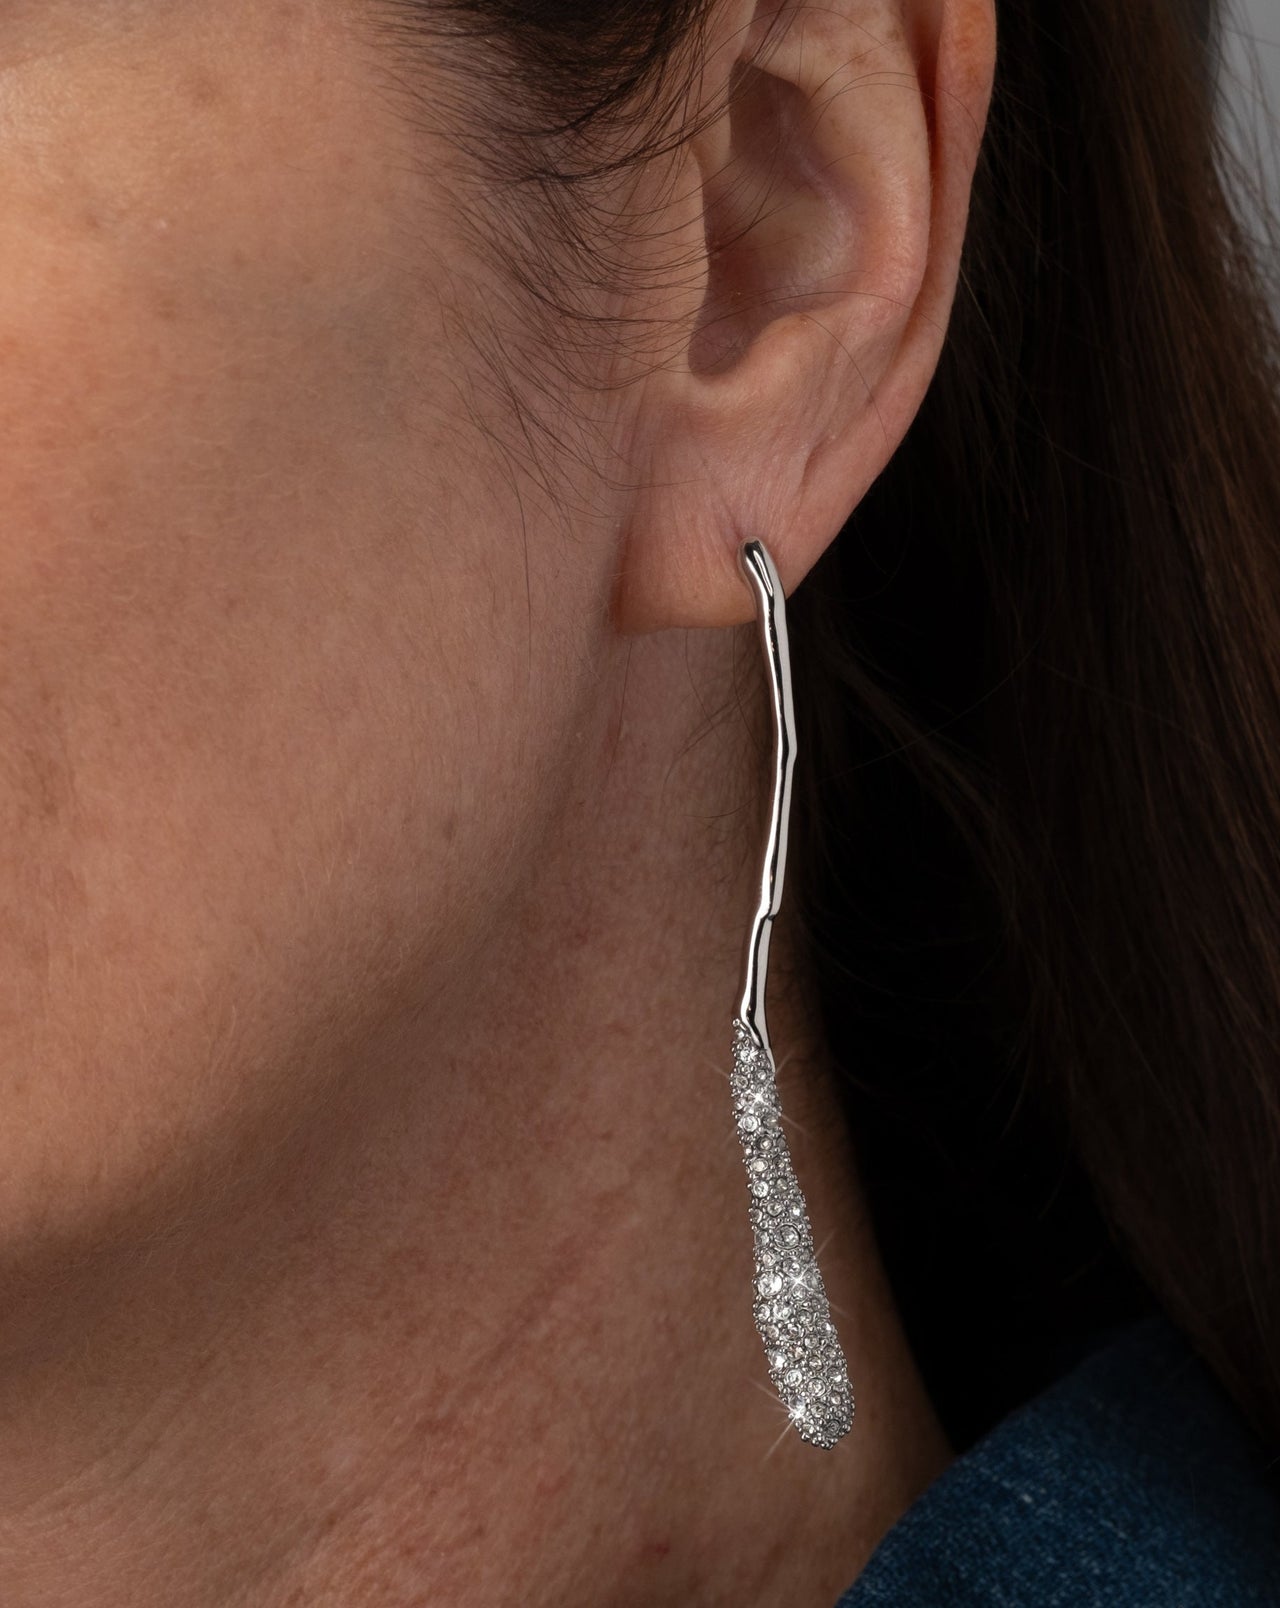 Solanales Silver Linear Earring - Photo 2